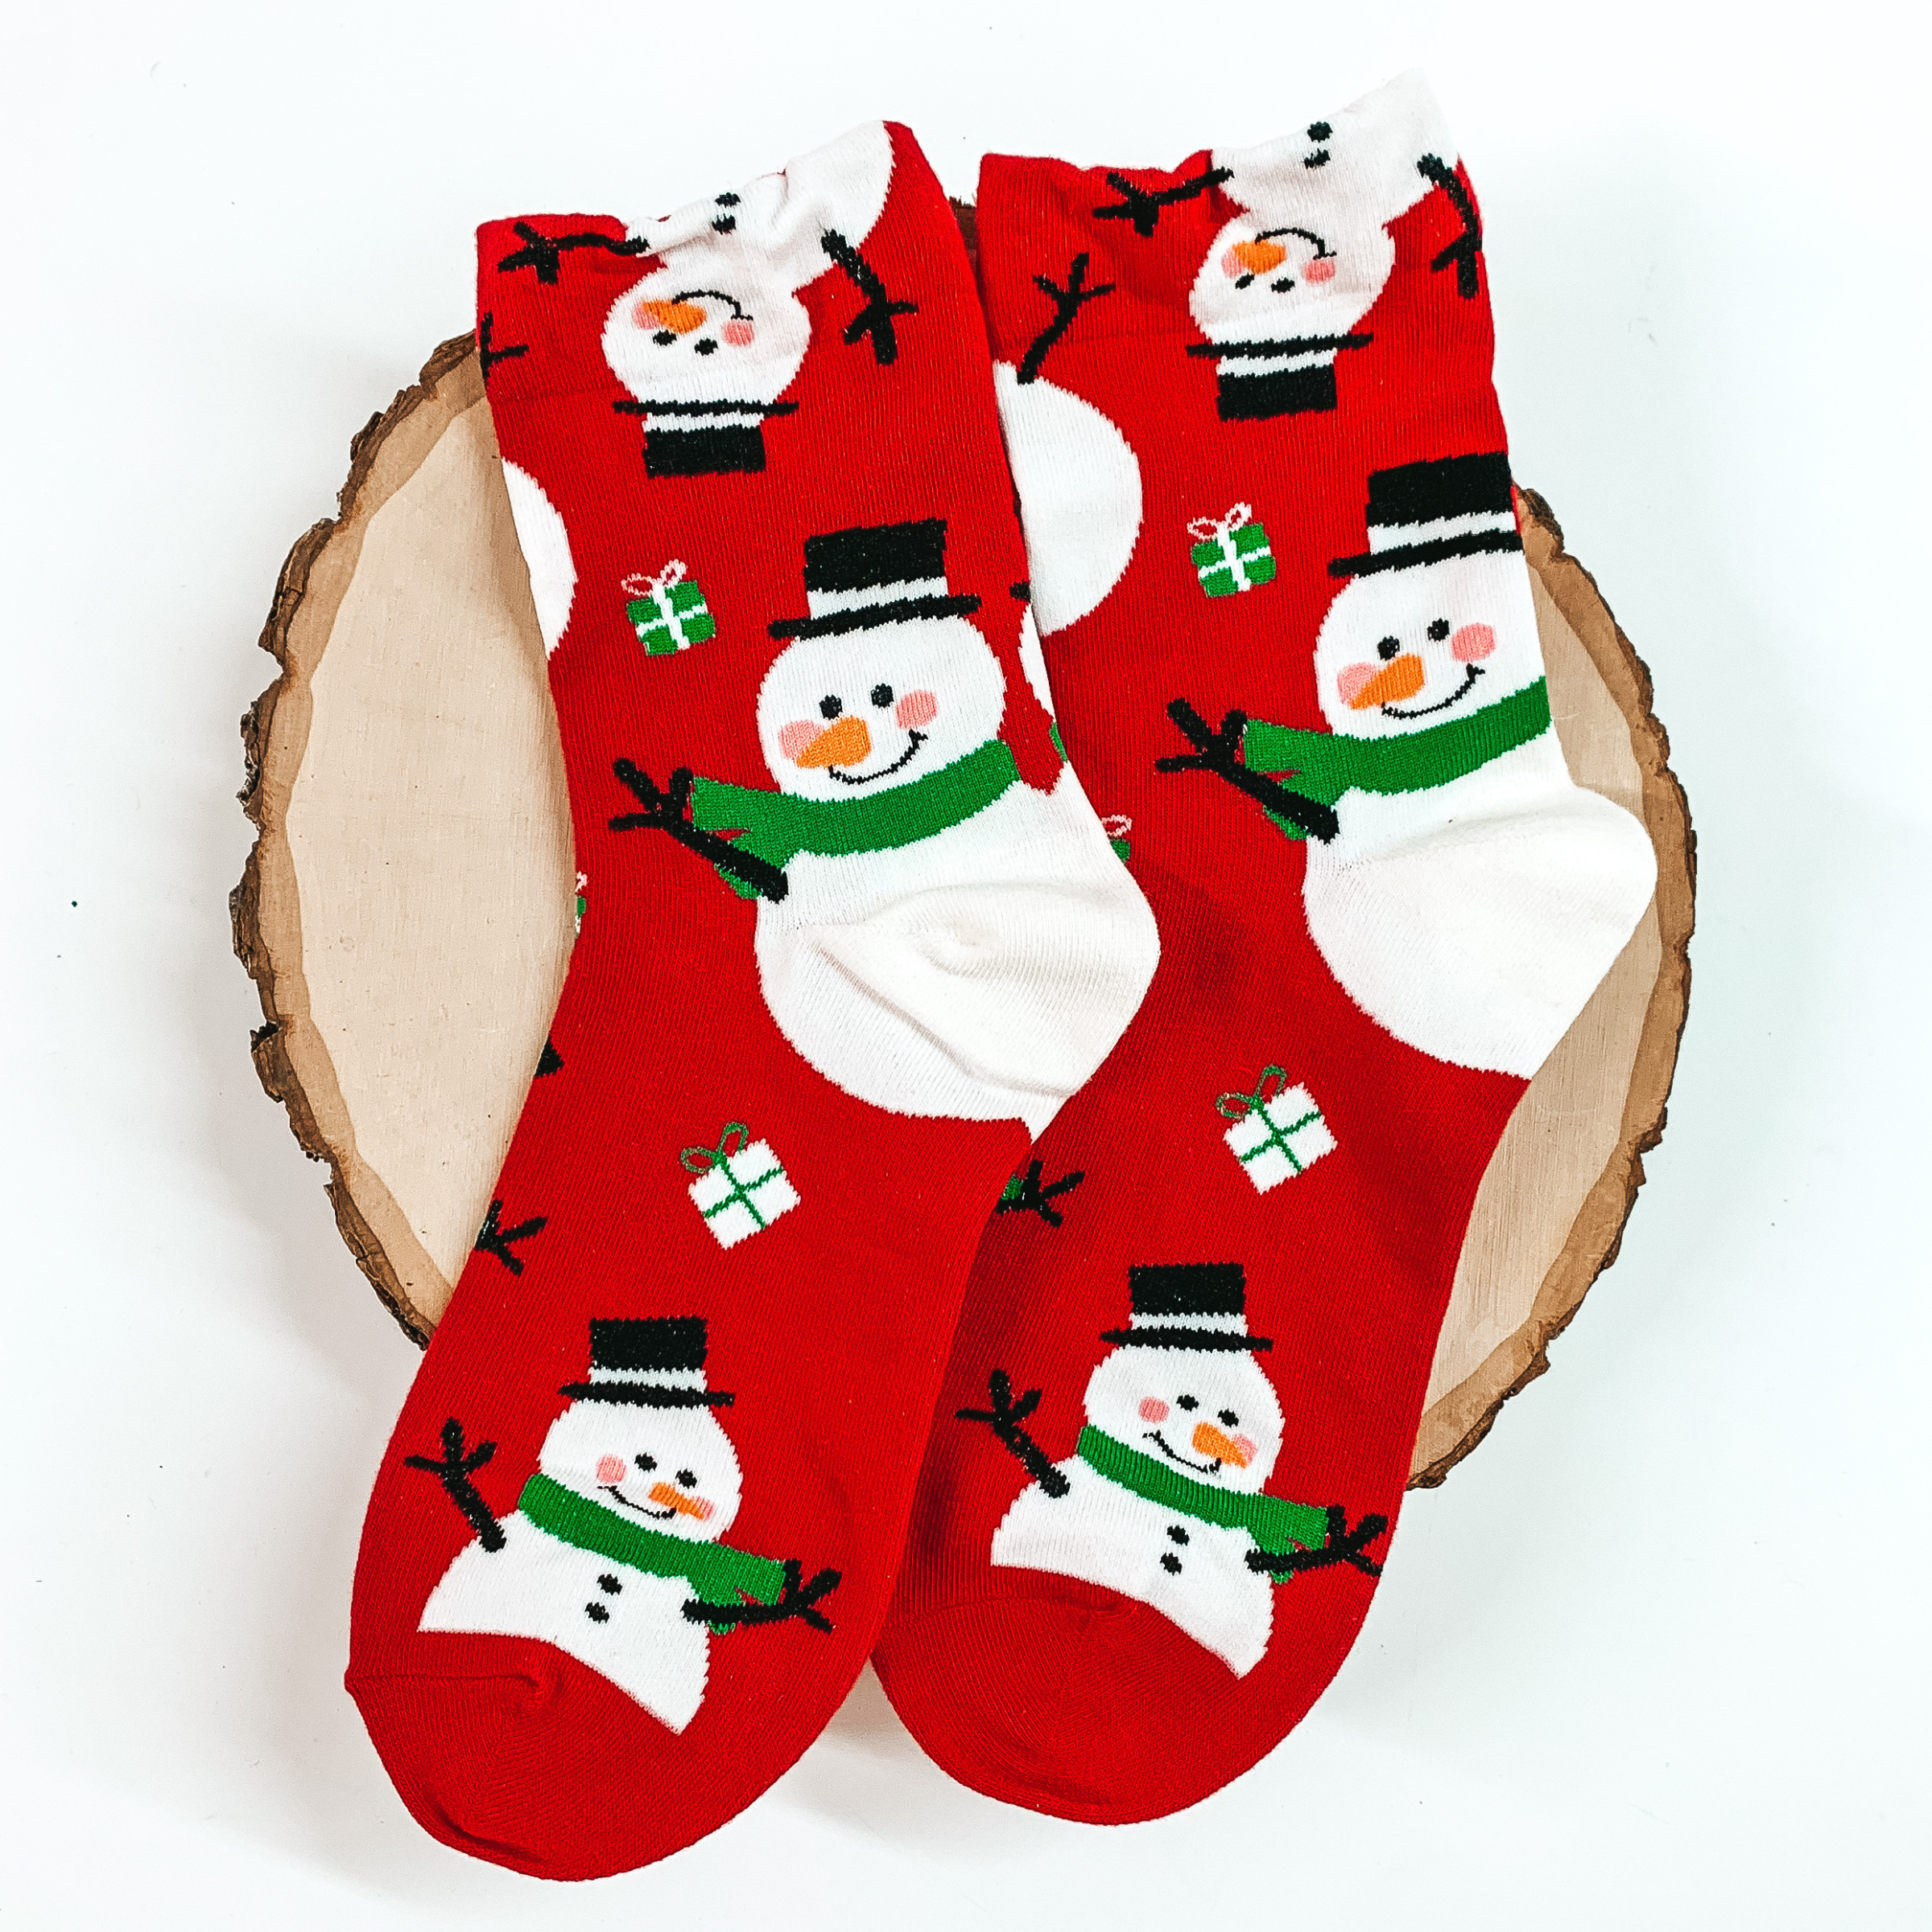 Red ankle socks that have a snowman print. These snowmans include a green scarf and black top hat. These socks are pictured on a piece of wood on a white background. 